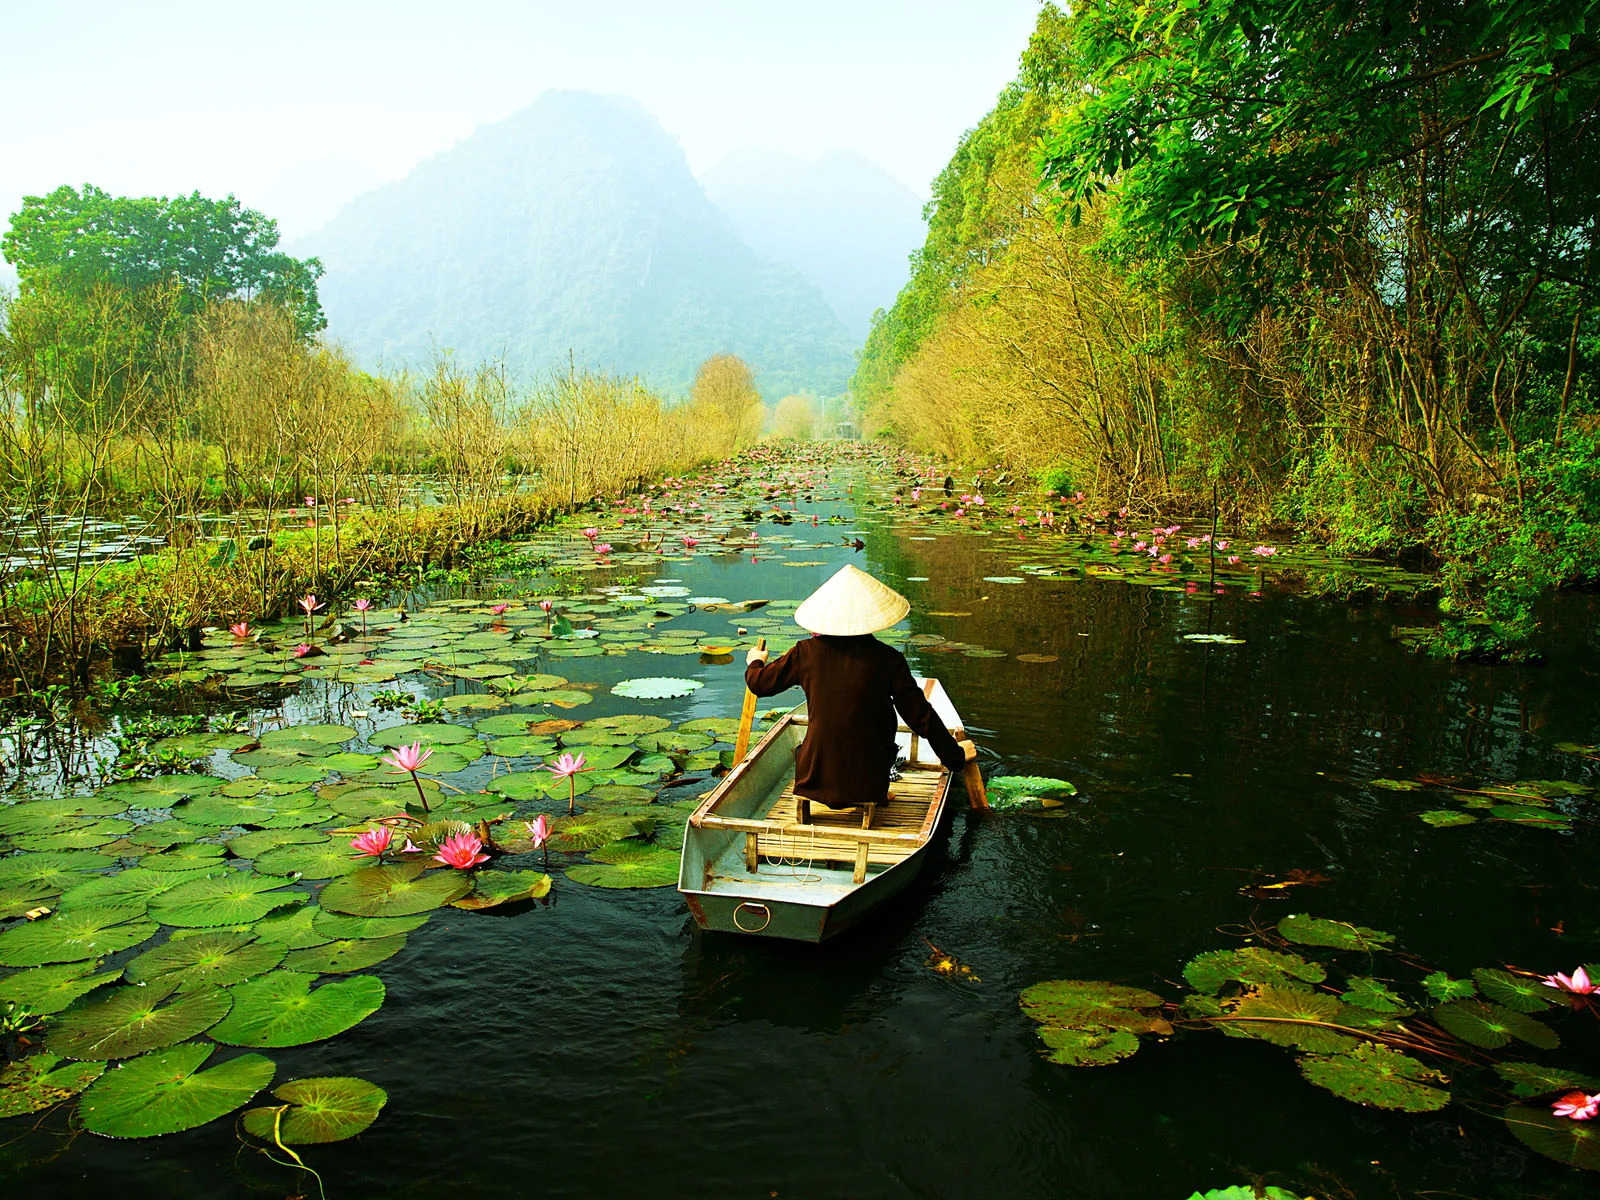 Rice farmer on a river with lily pads in Autumn, the cheapest time to visit Thailand